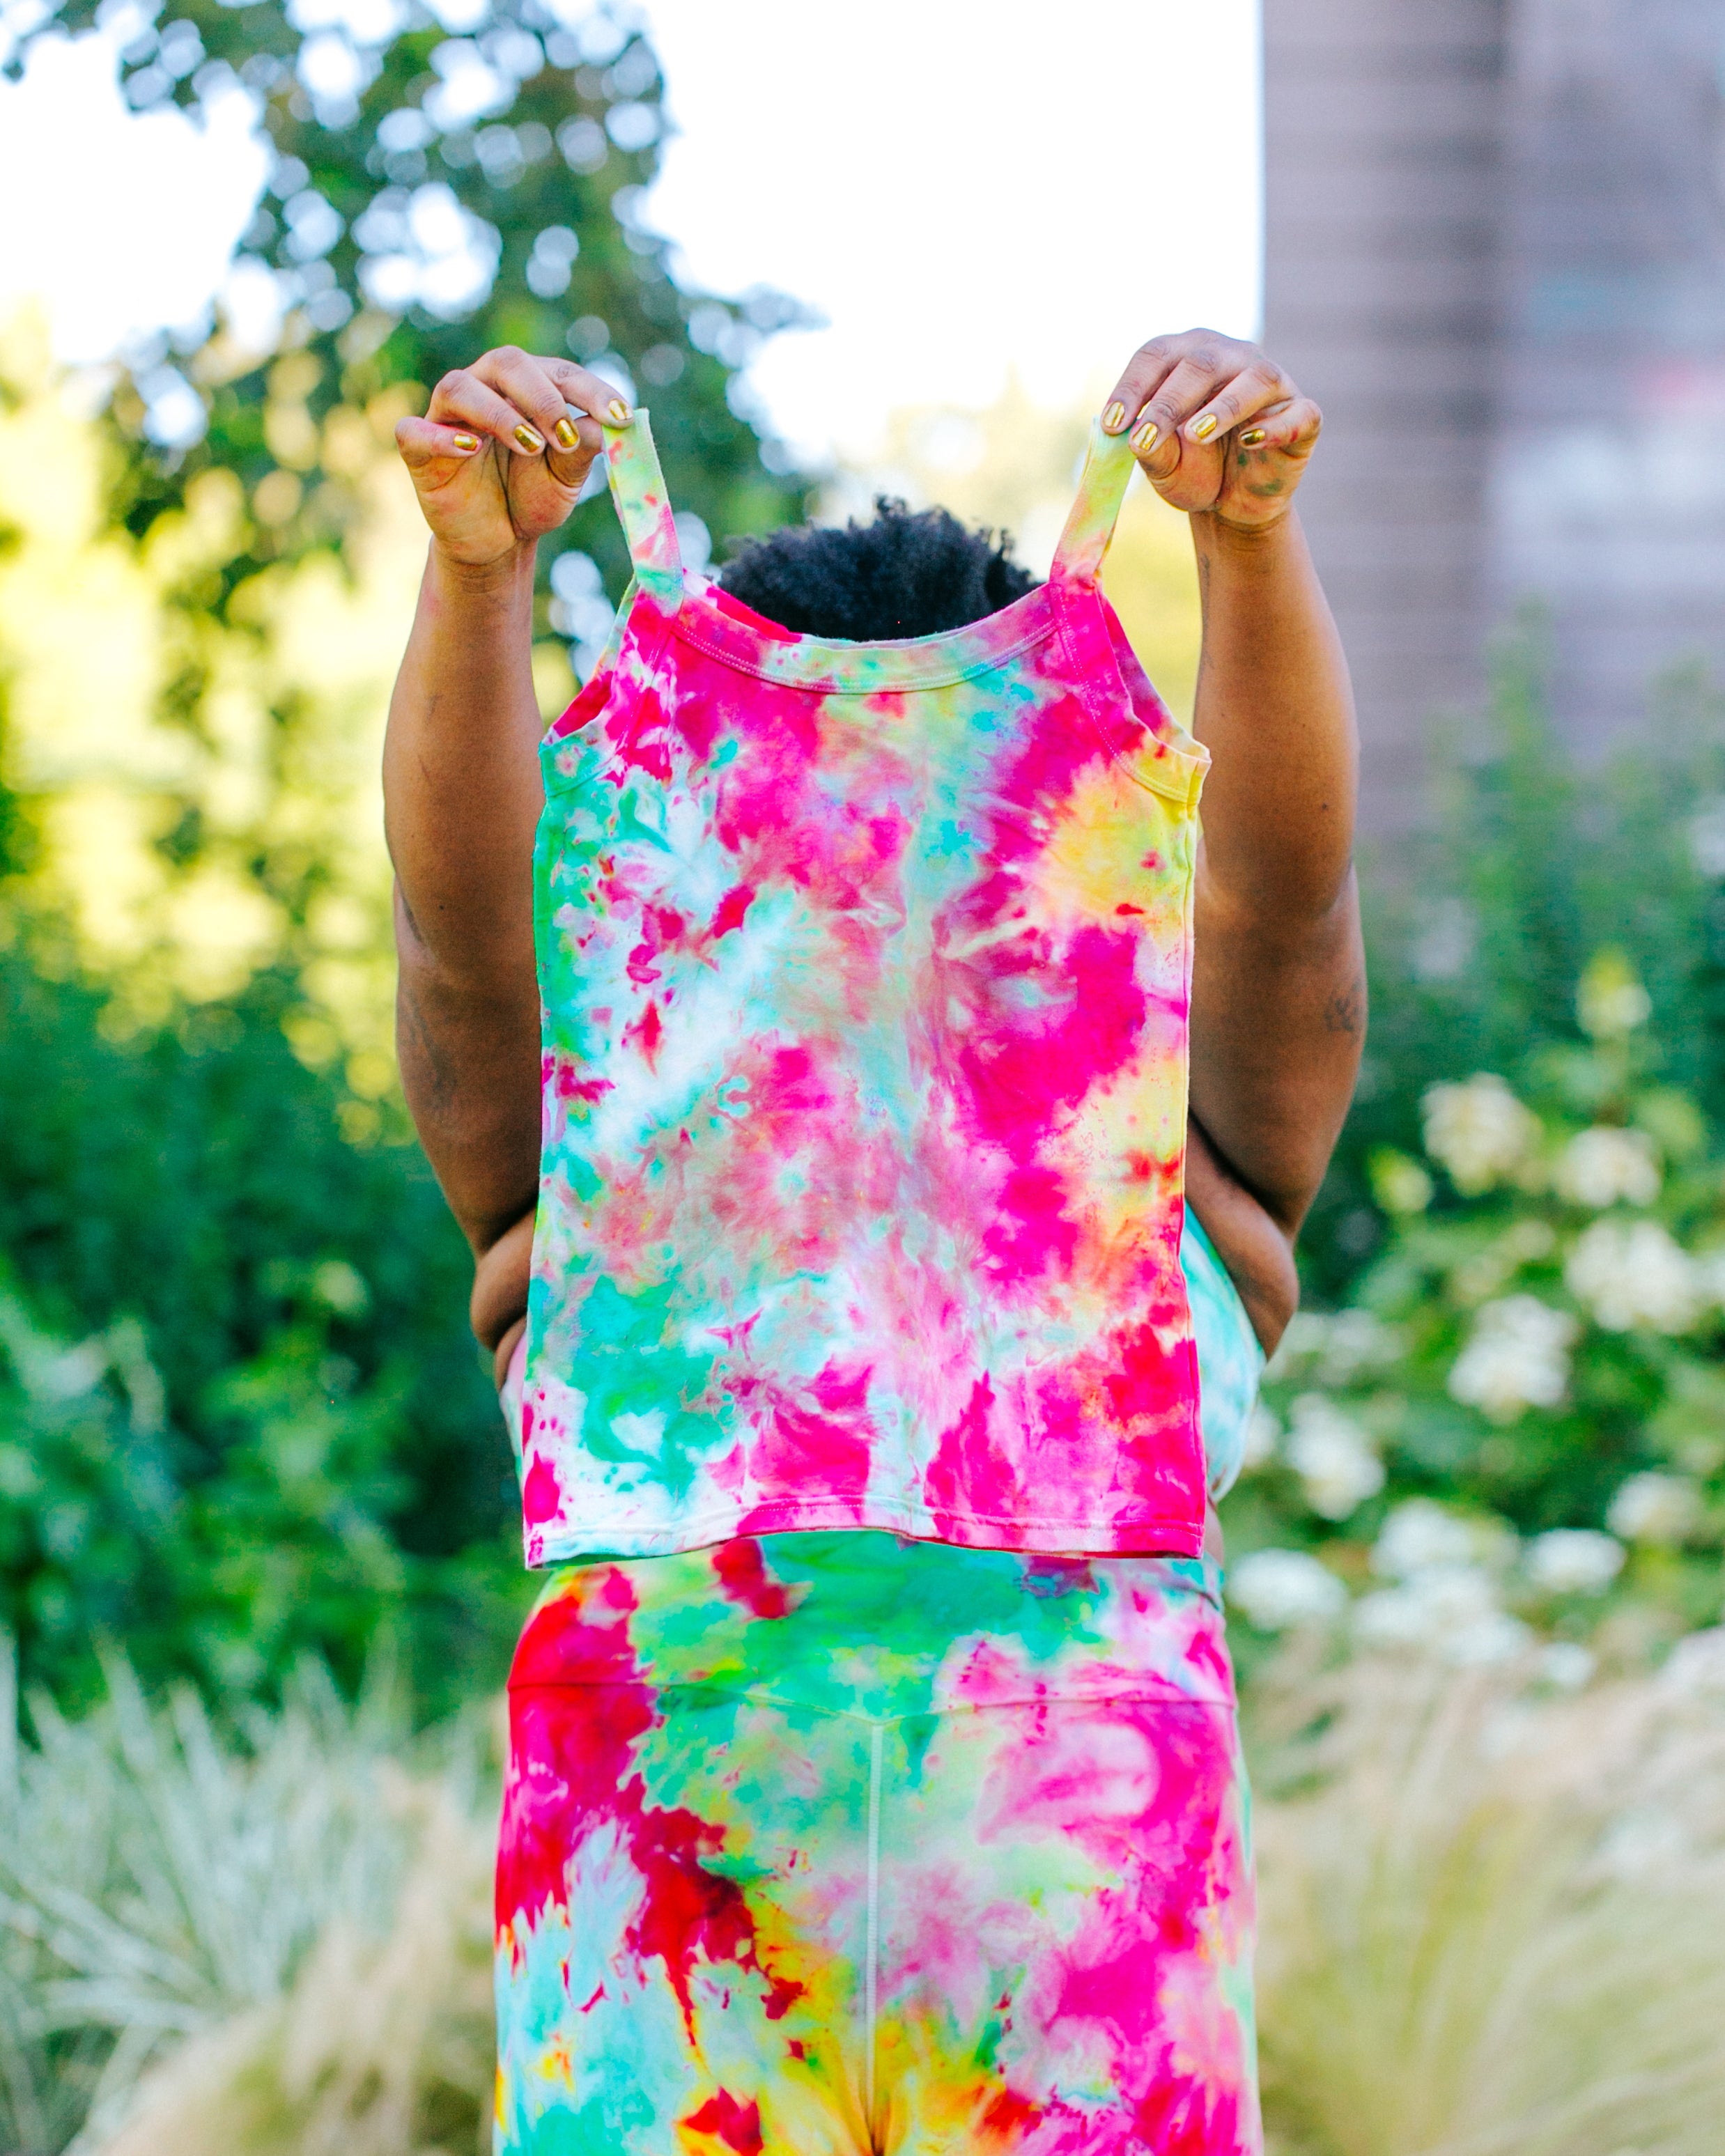 Model wearing Ice Dyed Bike Shorts holding up an Ice Dyed Camisole with a mix of bright pink, green, and yellow colors.